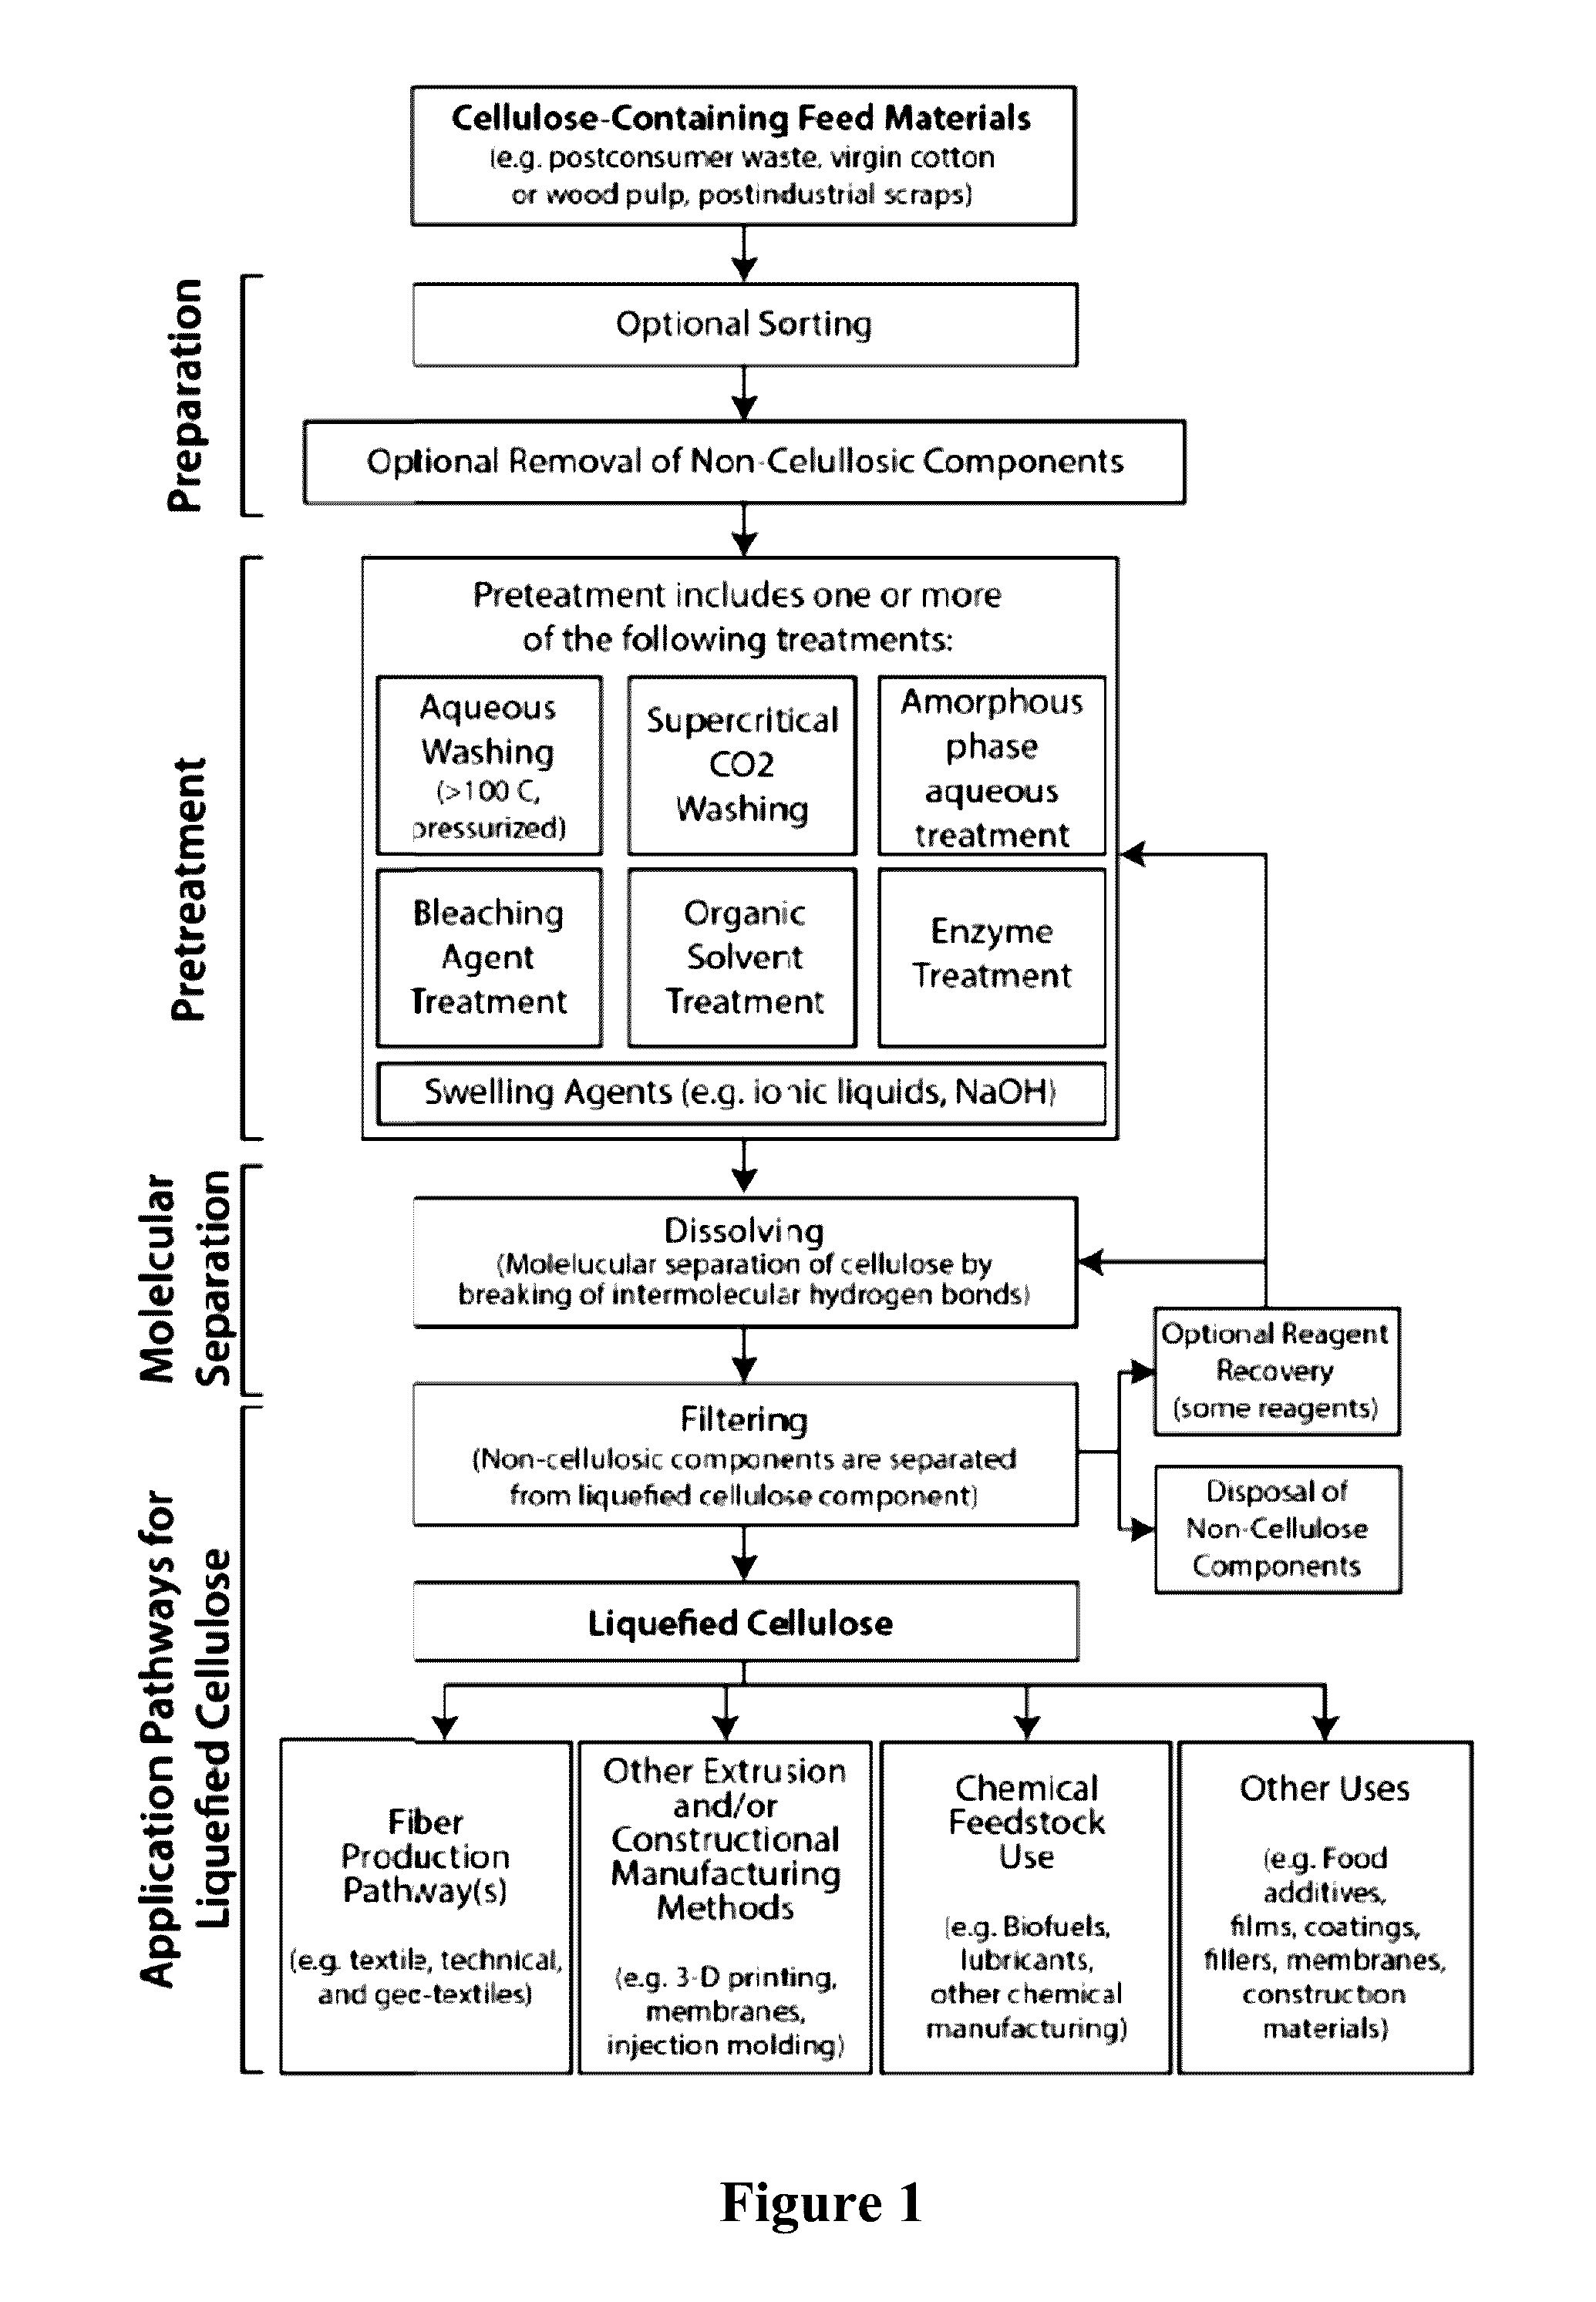 Methods and systems for processing cellulose-containing materials and isolating cellulose molecules; methods for regenerating cellulosic fibers